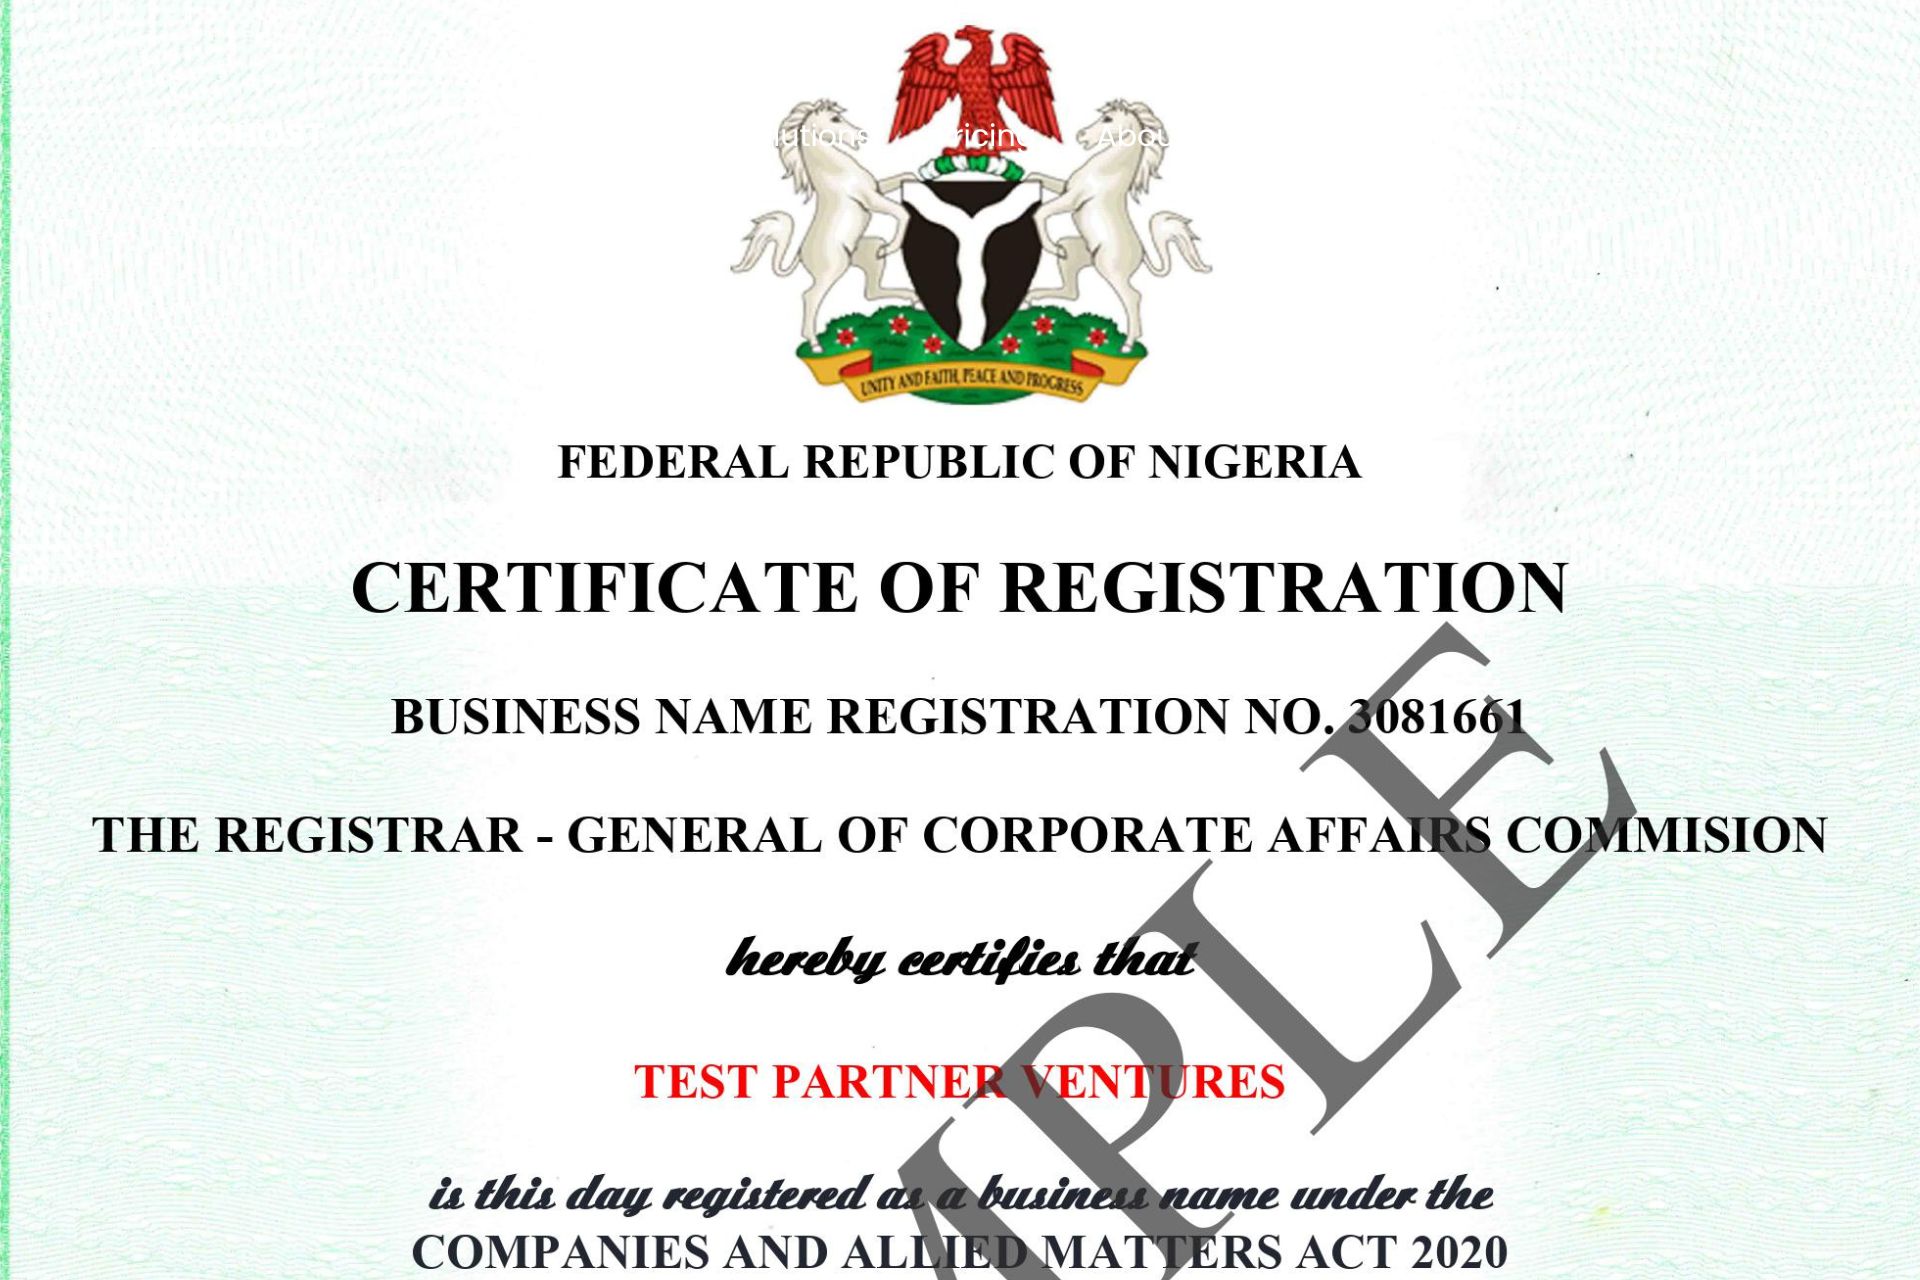 How to Register Business in Nigeria Online